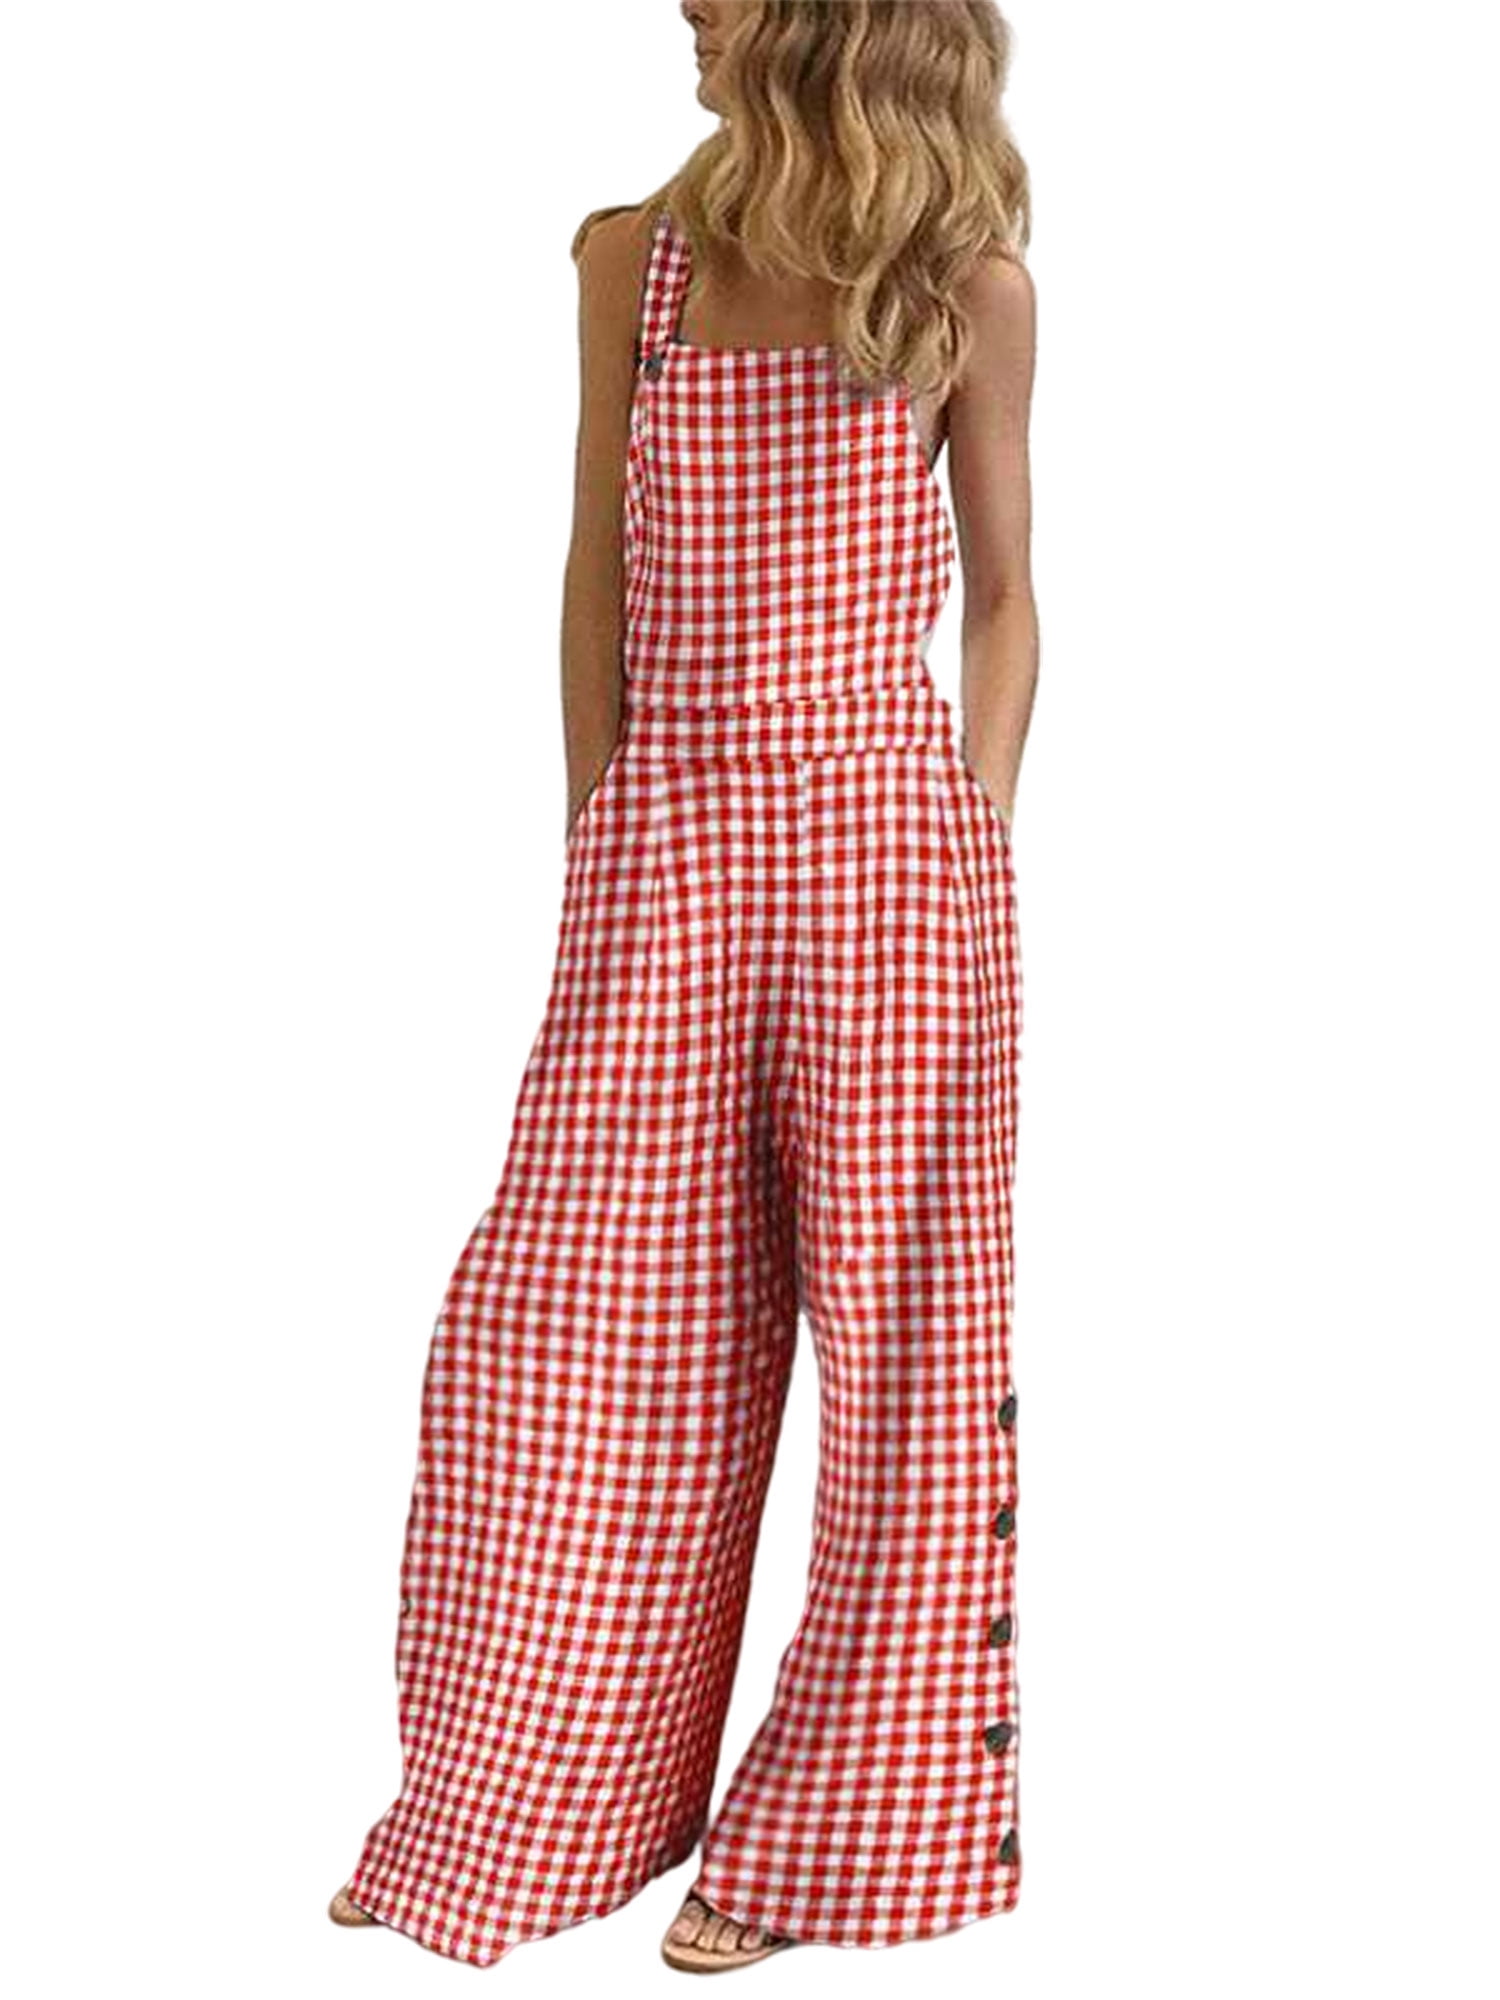 Jumpsuits for Women Casual Summer,Overalls Plus Size Suspender Playsuit Plaid Backless Shorts Rompers with Pocket 